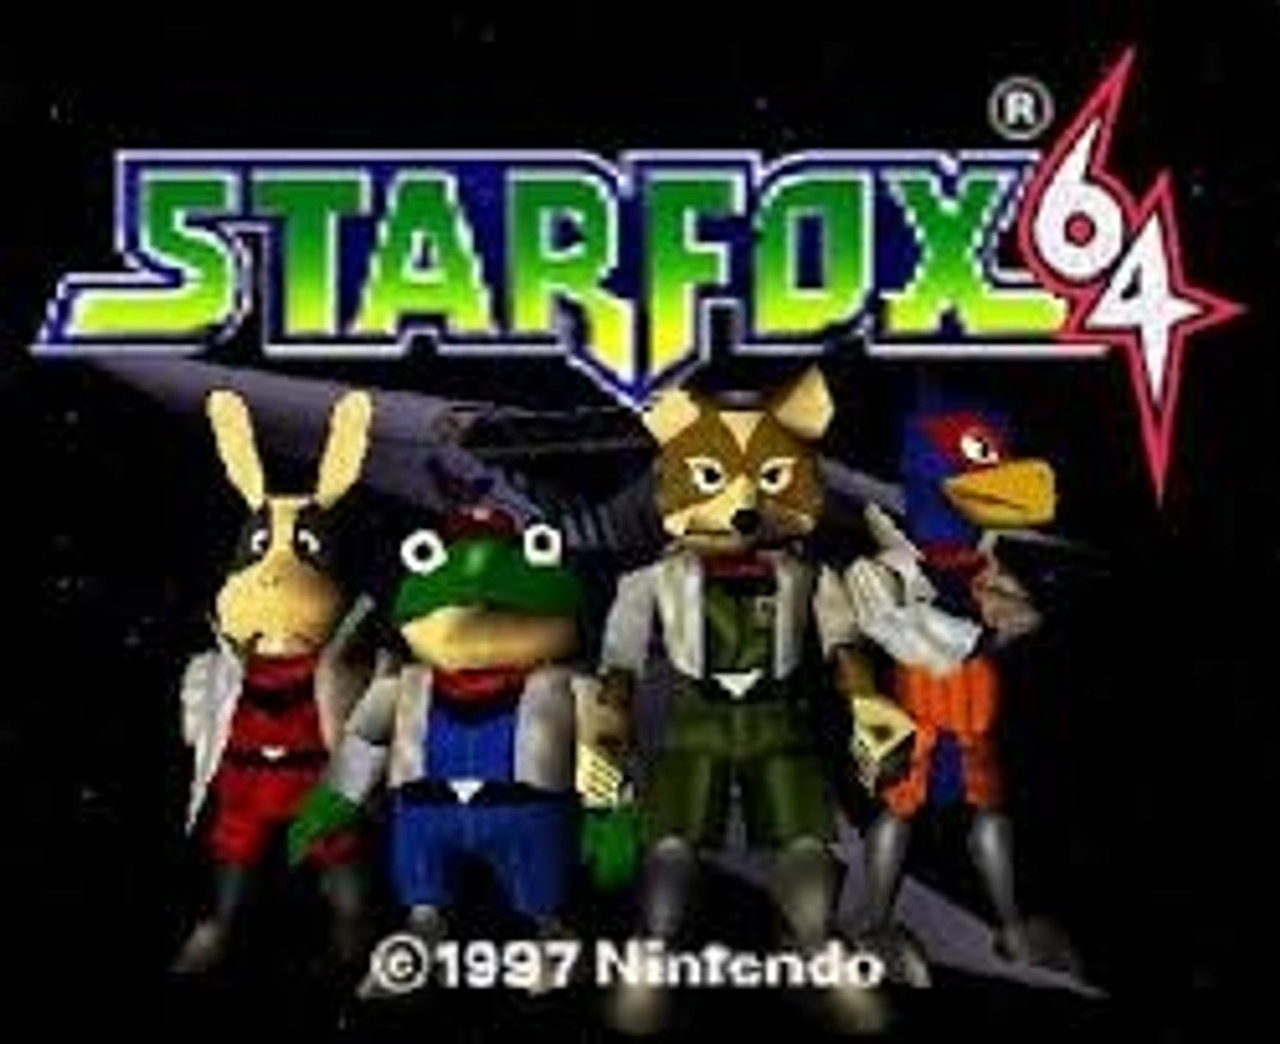 Star Fox 64 + rumble pack Nintendo 64 N64 EXMT+ condition COMPLETE n box!